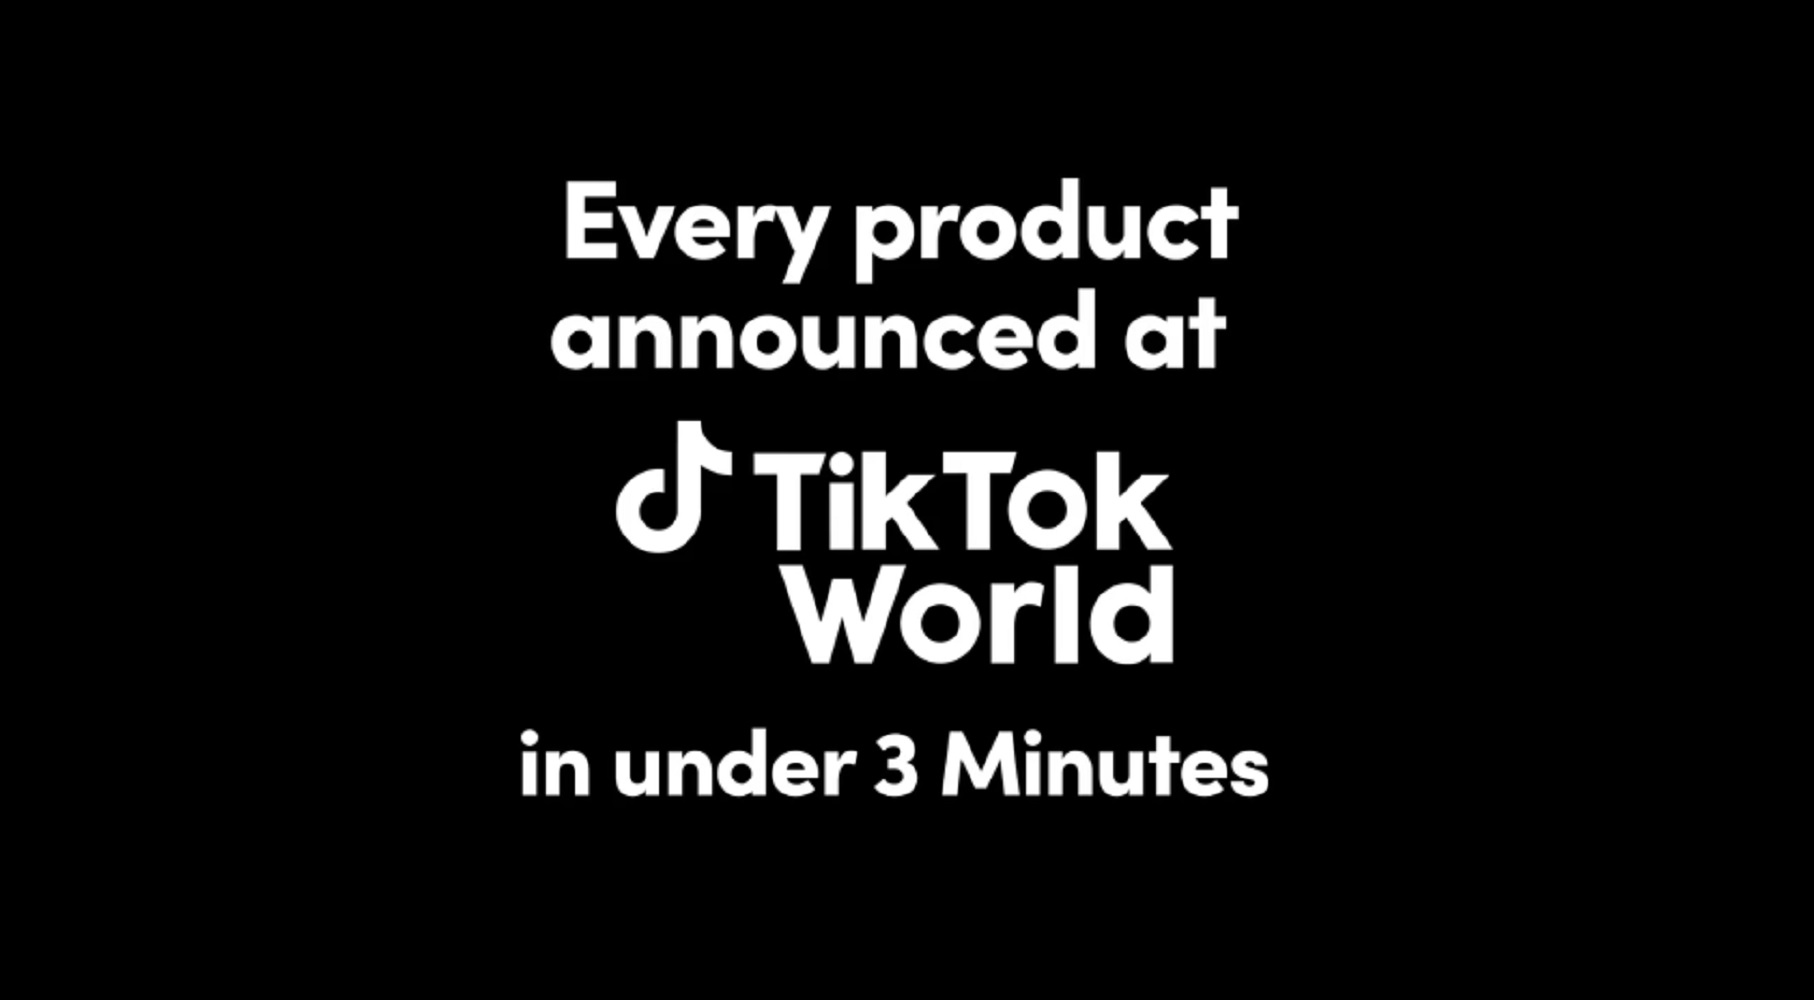 Every Product Announced at TikTok World in Under 3 Minutes